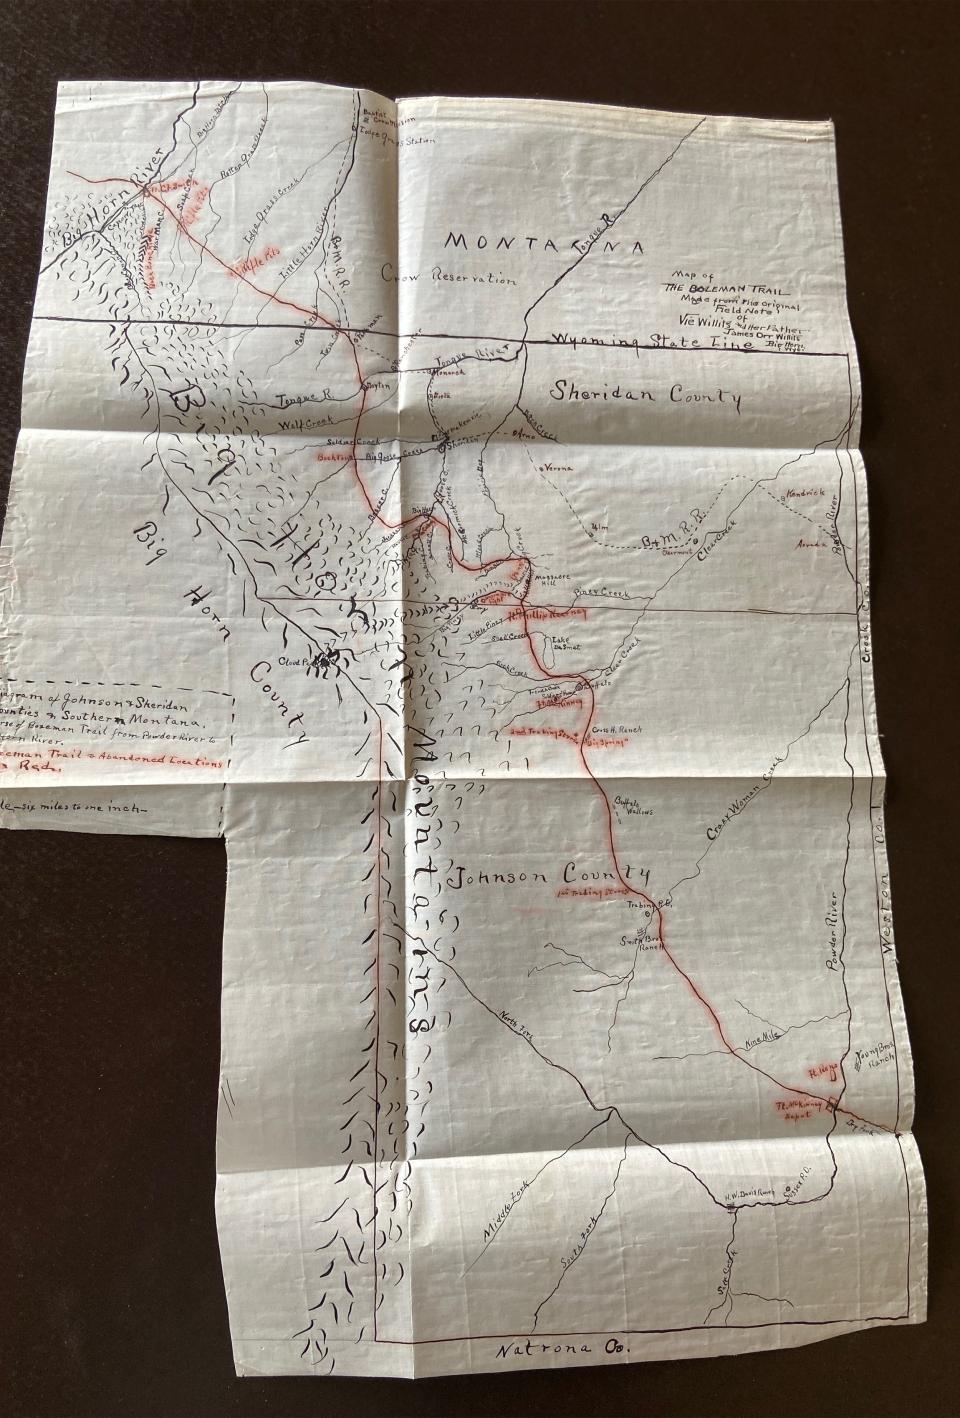 Vie drew this map of the Bozeman Trail for her 1910 University of Wyoming master’s thesis. She clearly locates forts, creeks, towns, a few ranches, the Burlington Railroad and other sites of interest,. The route runs  from Fort Reno near the Powder River crossing north to the site of Fort C.F. Smith on the Bighorn River in Montana Author photo.